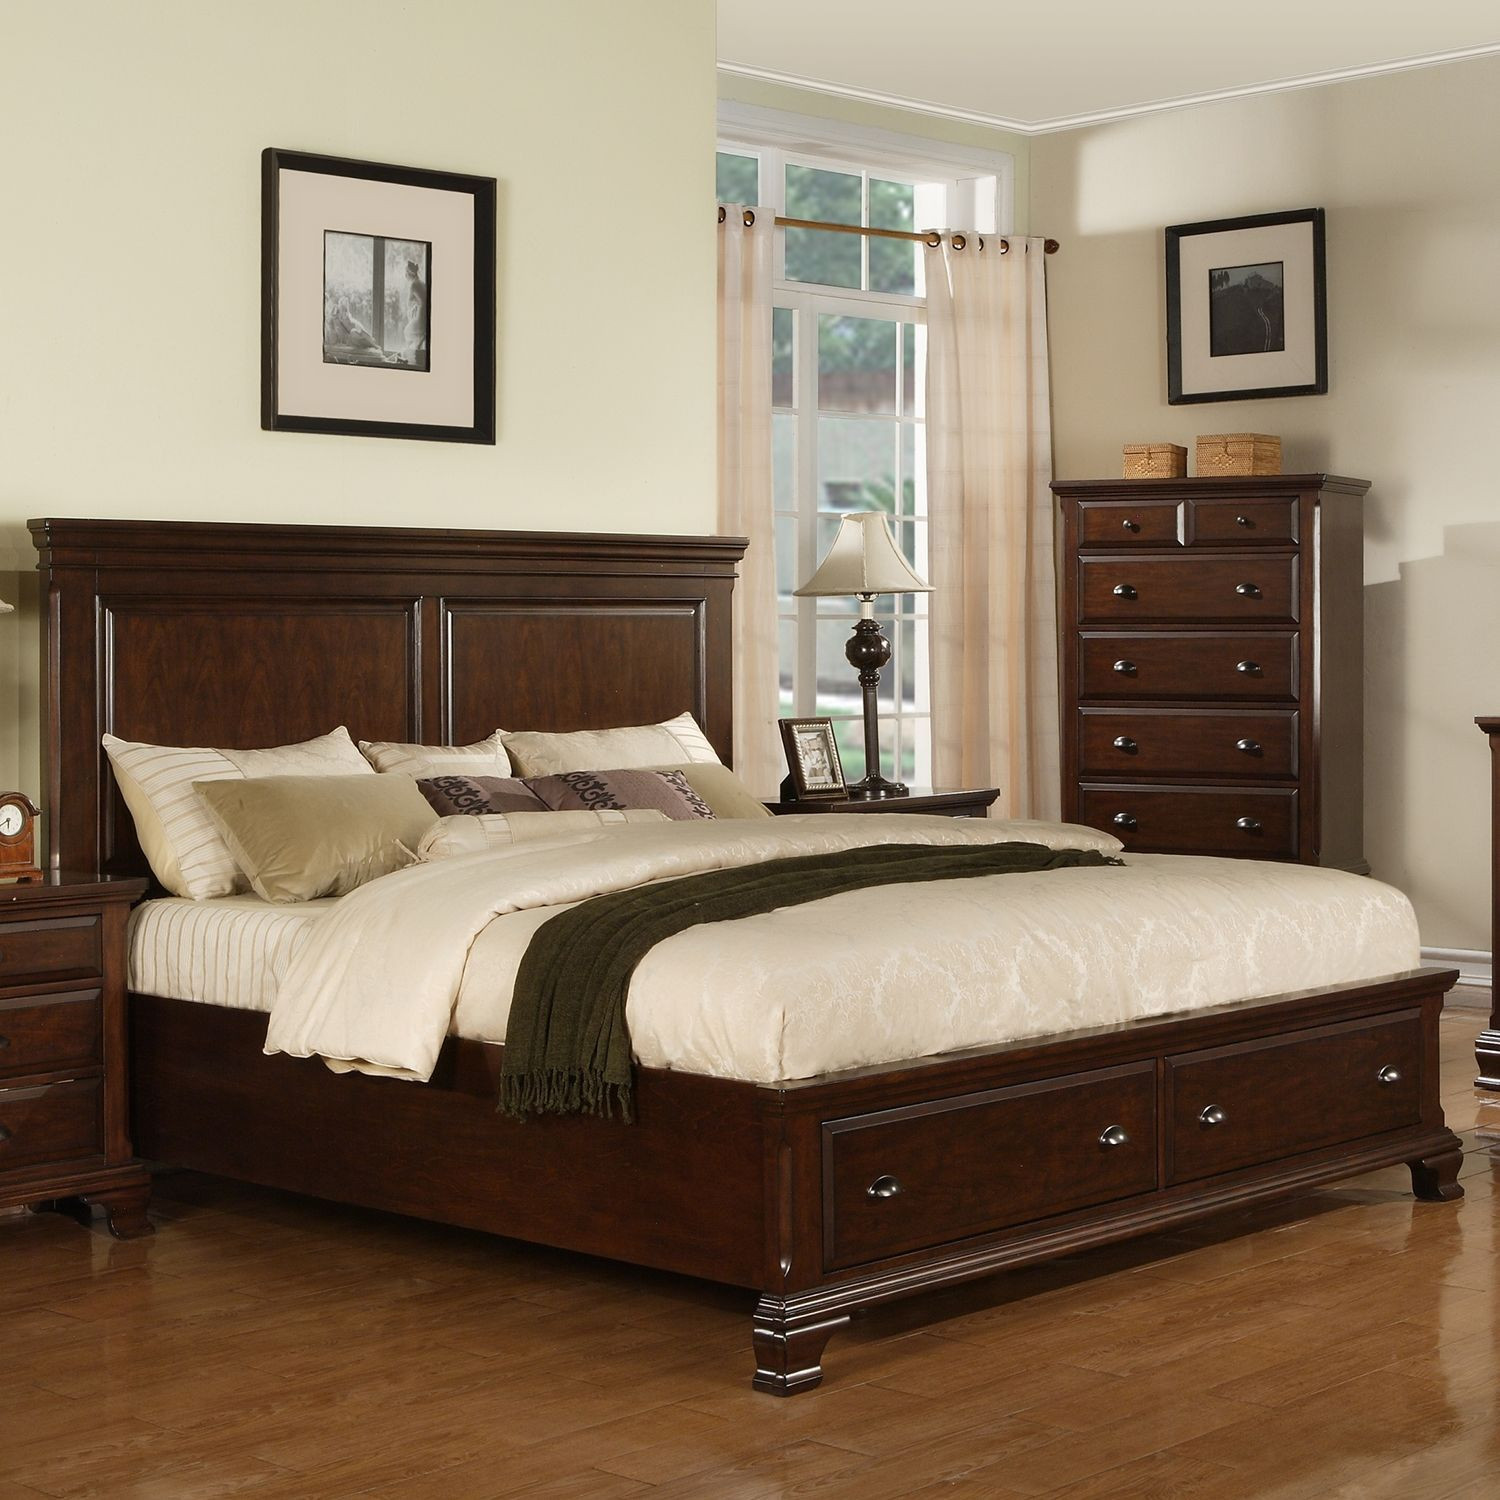 King Bedroom Sets With Storage
 6 Pieces Queen Storage Bedroom Sets Storage Drawers Frame